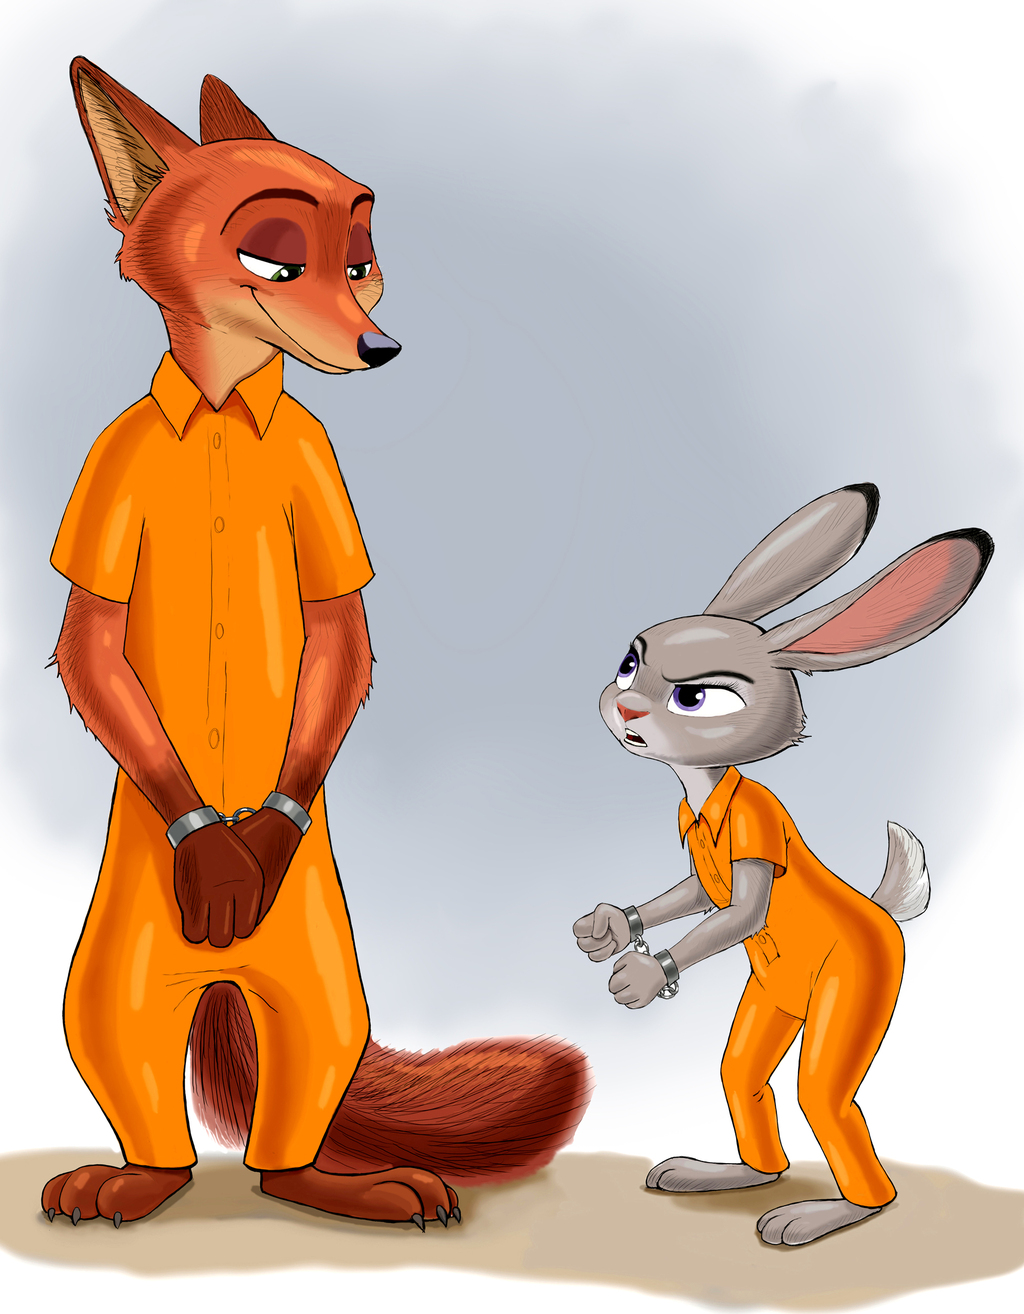 Most recent image: Judy Hopps and Nick Wilde